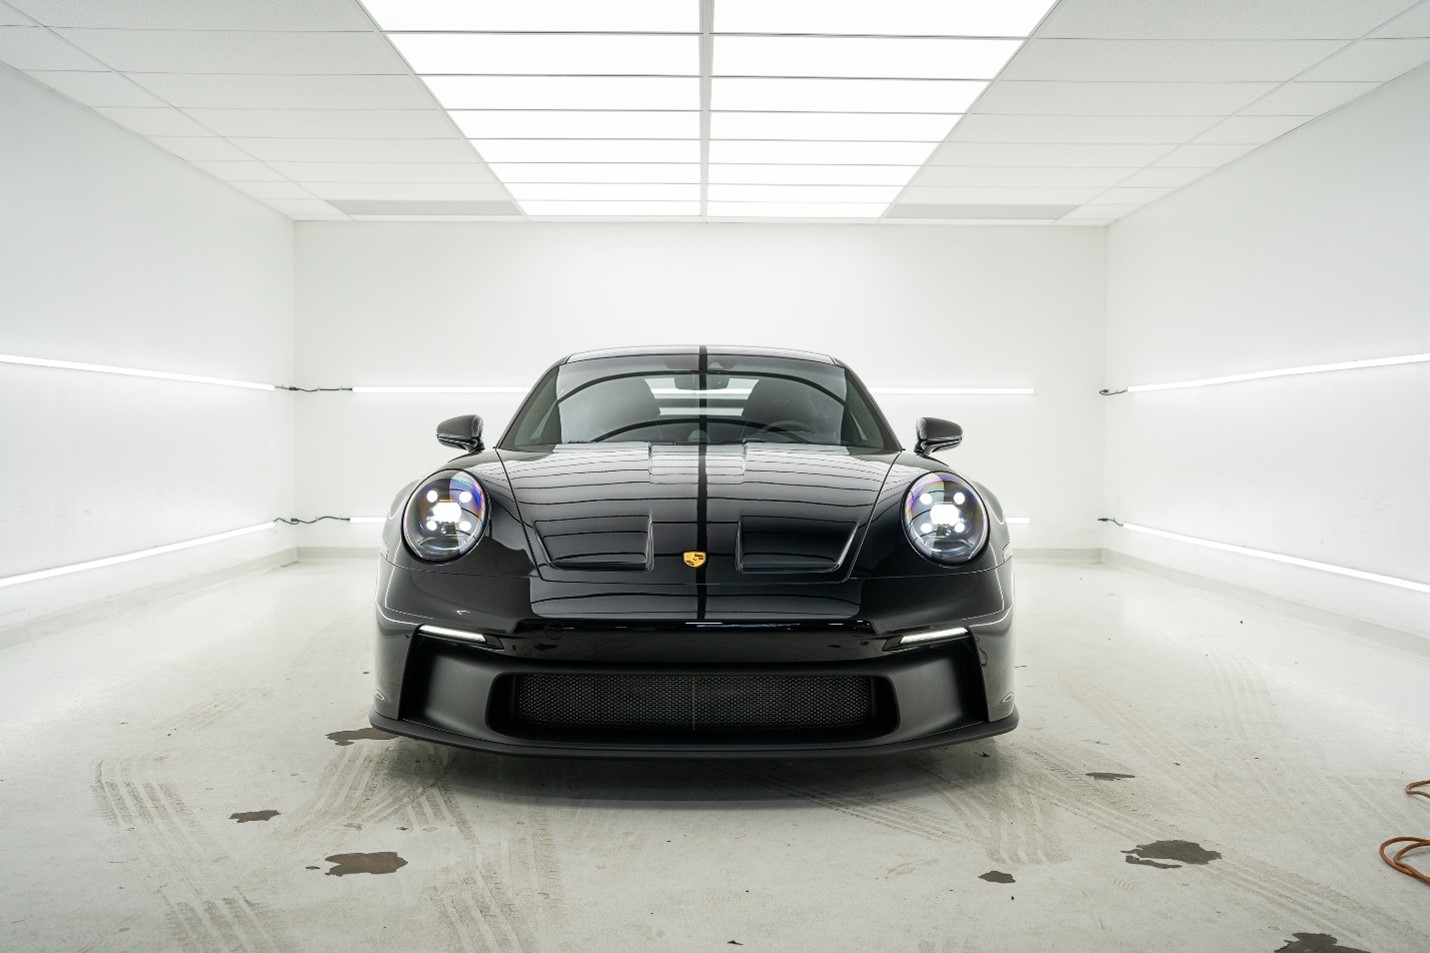 3 Reasons to protect your Porsche with XPEL PPF - A-PLUS TINT + PPF, Xpel  Ppf 